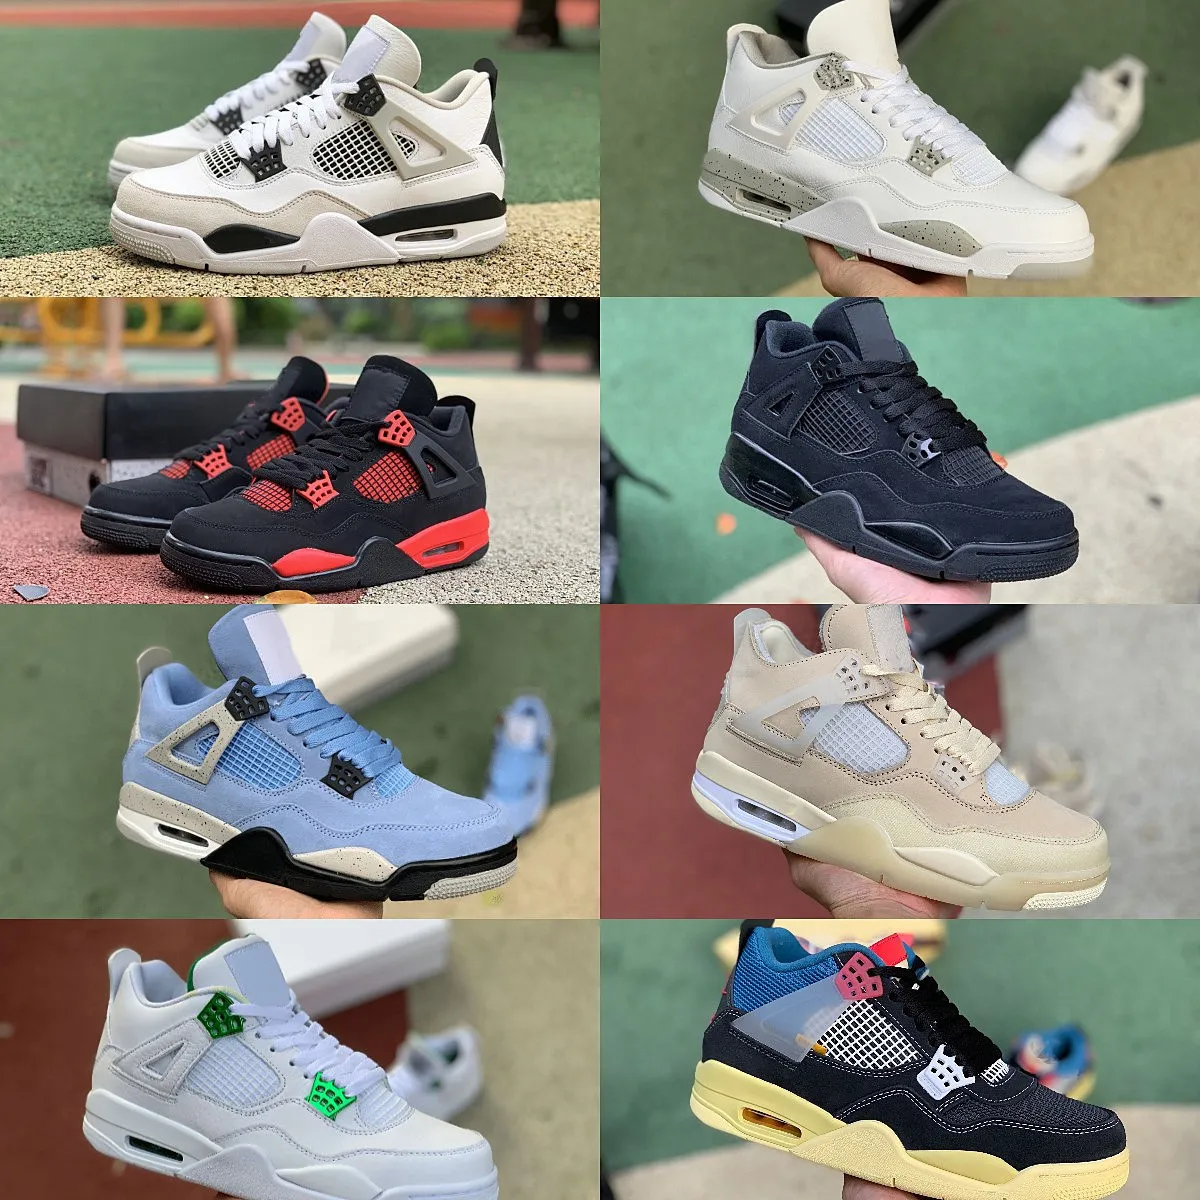 Designer Military Black 4 4s Casual Basketball Chaussures Jumpman University Blue Hommes Femmes NOIR Cement Cat Cream Voile Blanc Oreo Infrared Pure Money Trainer Sneakers